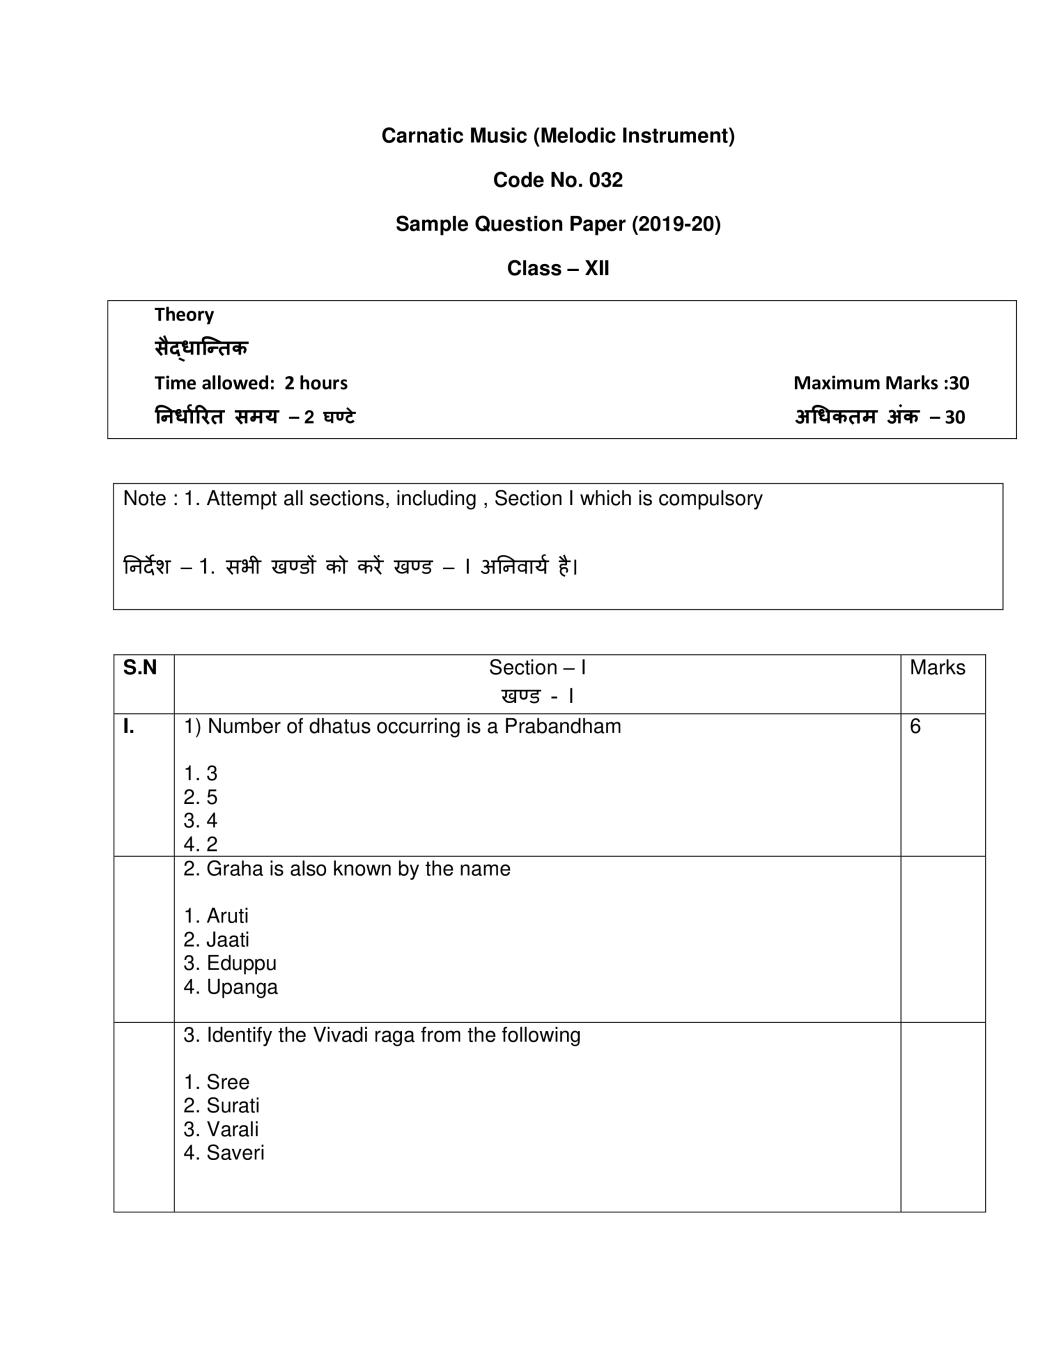 CBSE Class 12 Sample Paper 2020 for Carnatic Music (Melodic Instrument) - Page 1